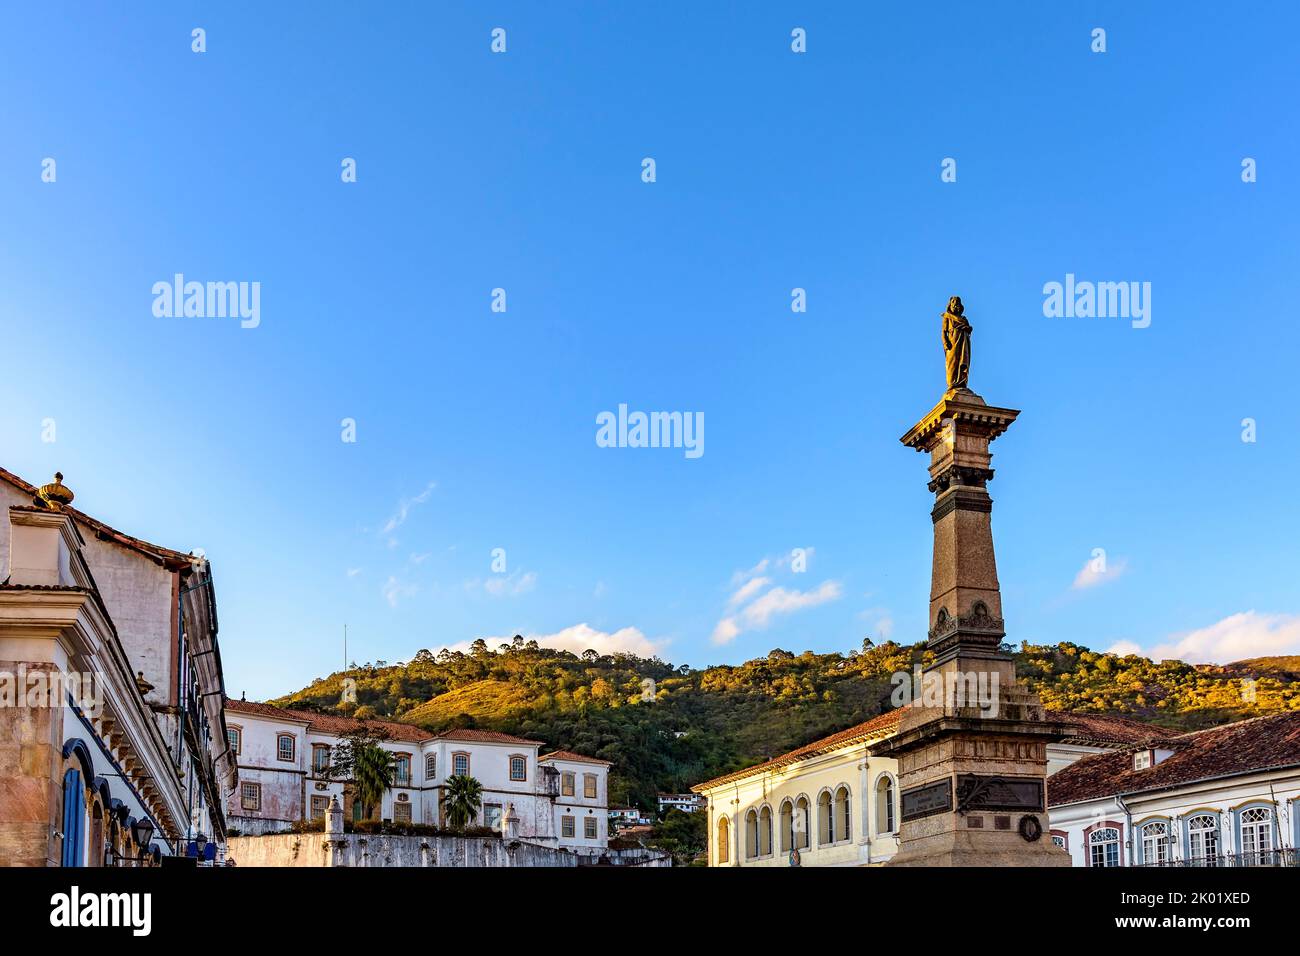 Central square of the historic town of Ouro Preto surrounded by colonial-style houses and hills Stock Photo